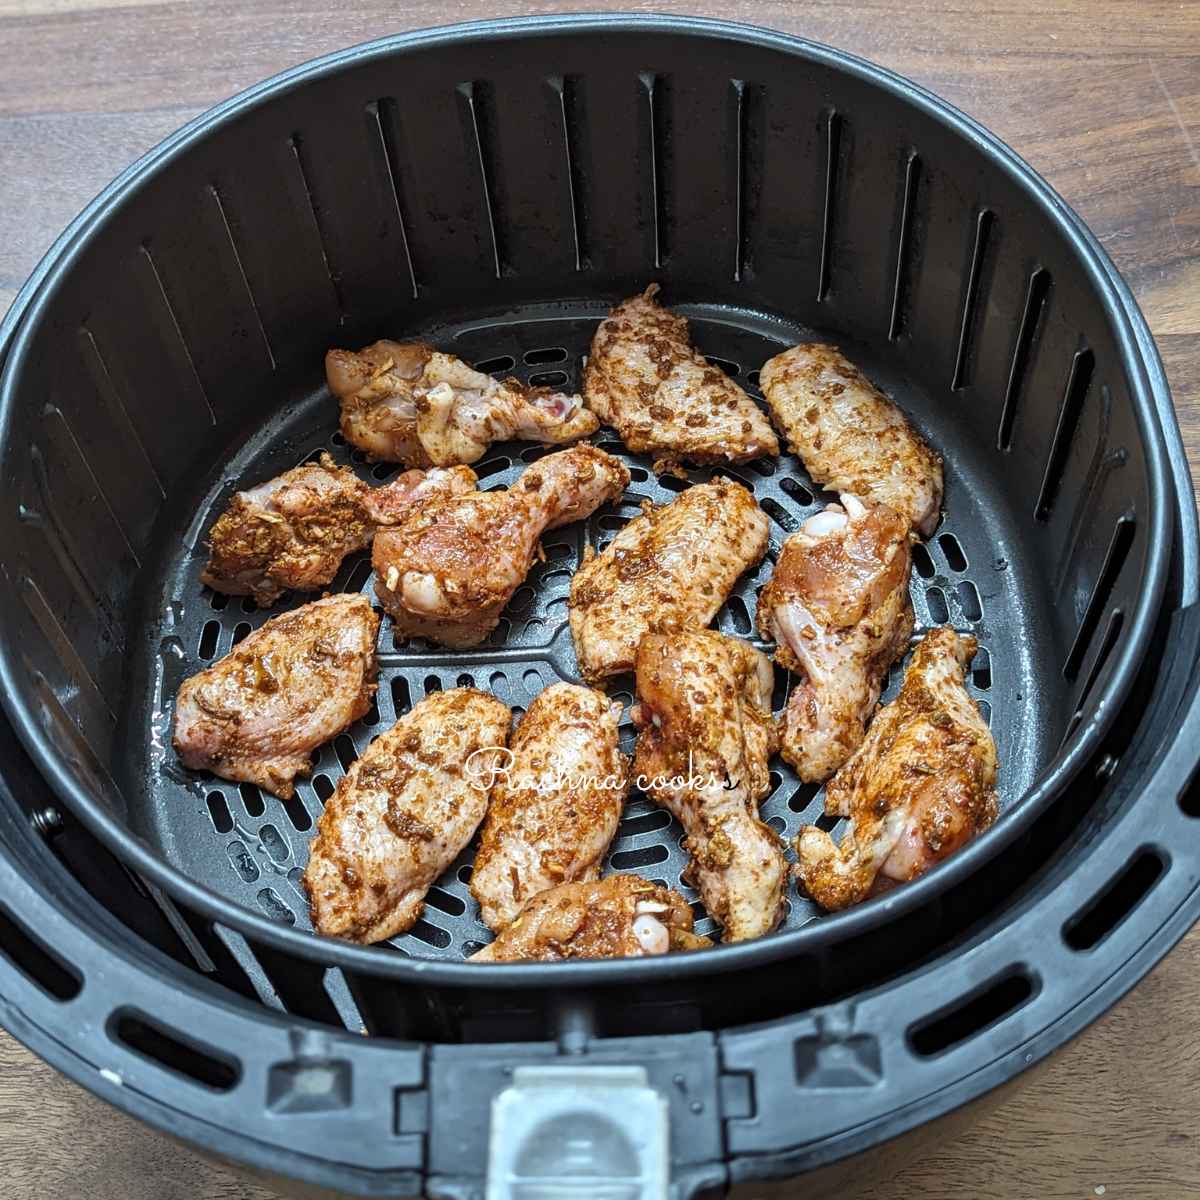 Marinated chicken wings placed in air fryer basket.